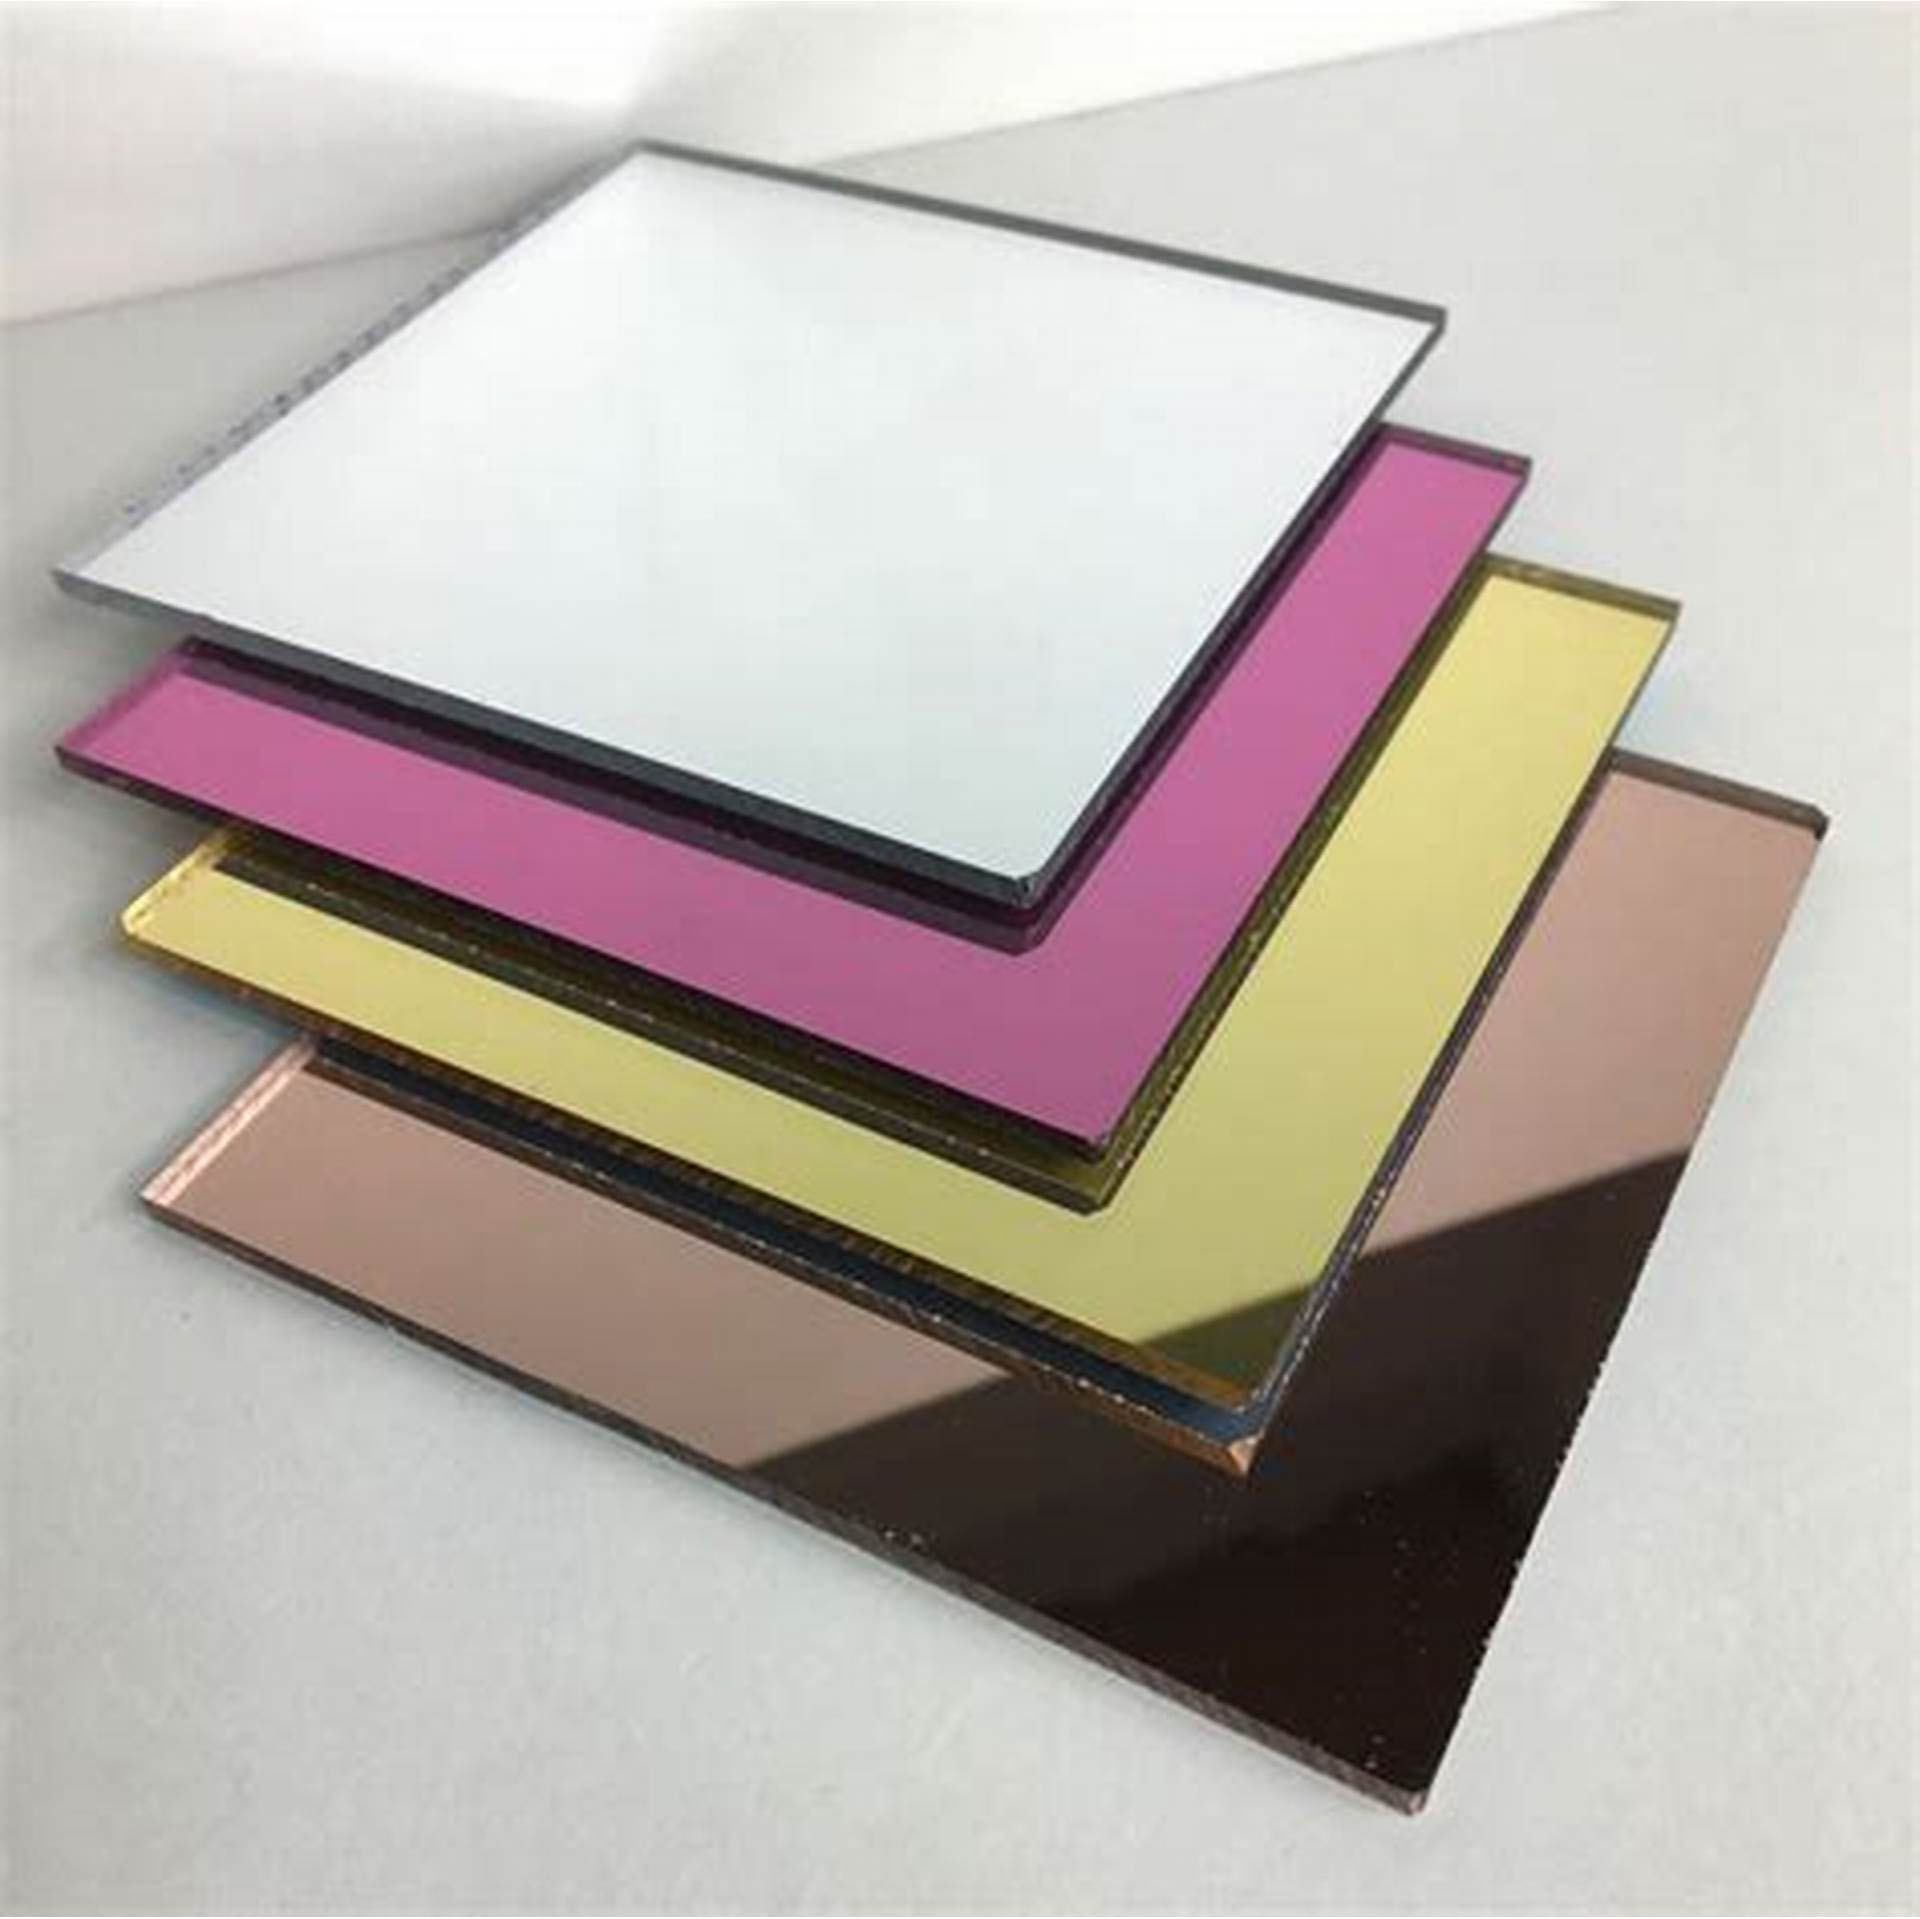 A Guide to Acrylic Mirror Sheets - Read Online